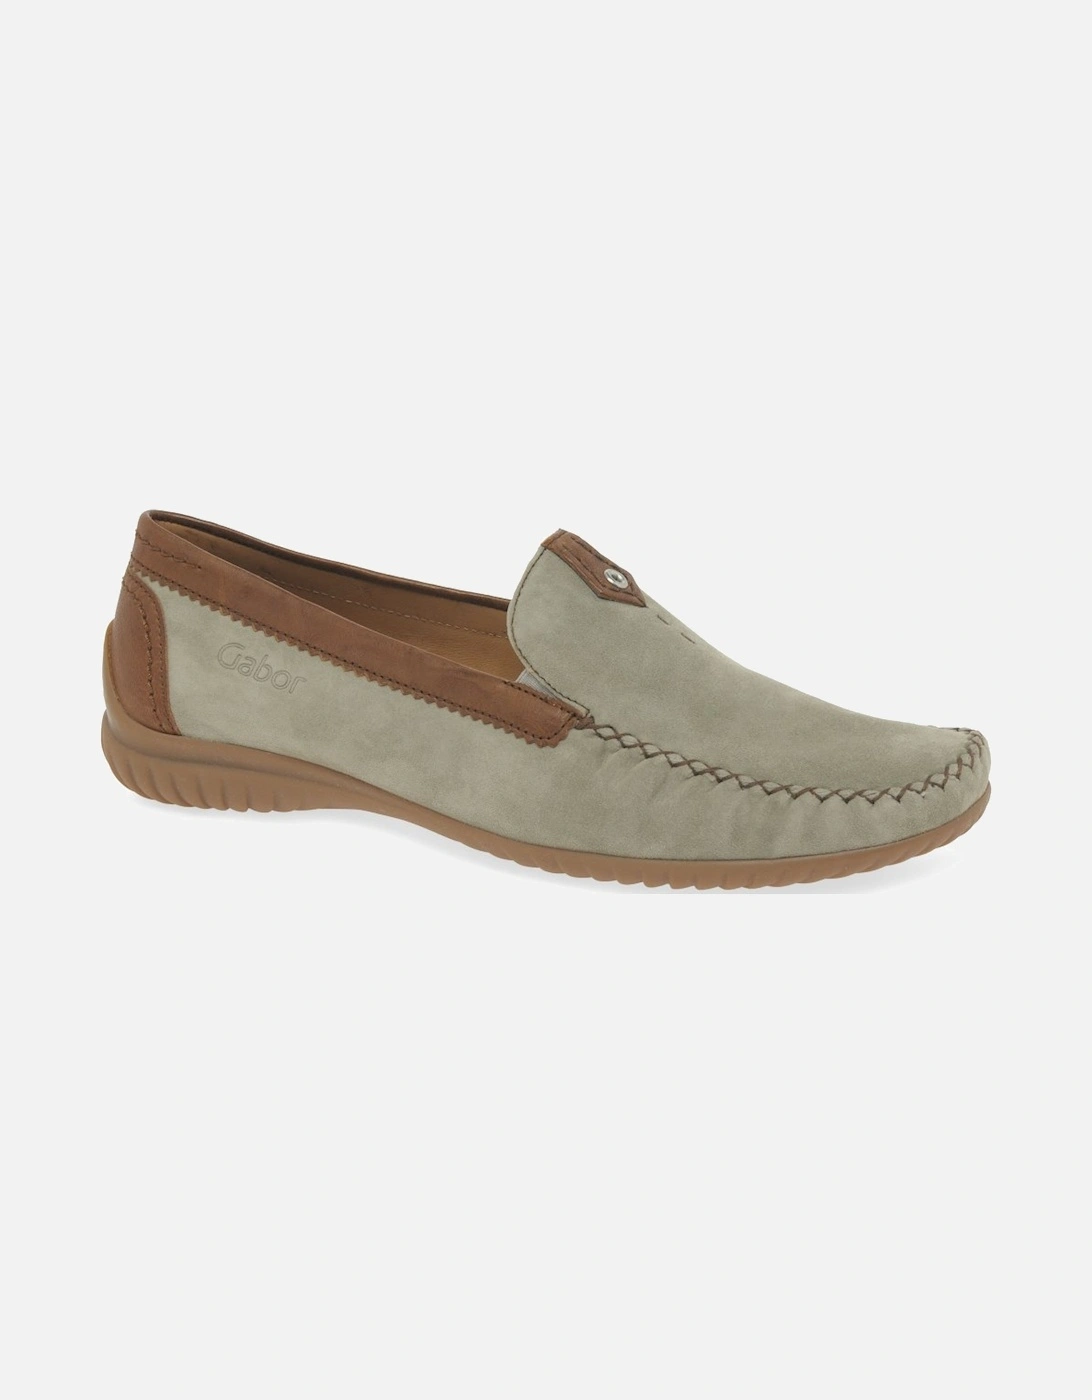 California Sporty Womens Moccasins, 7 of 6